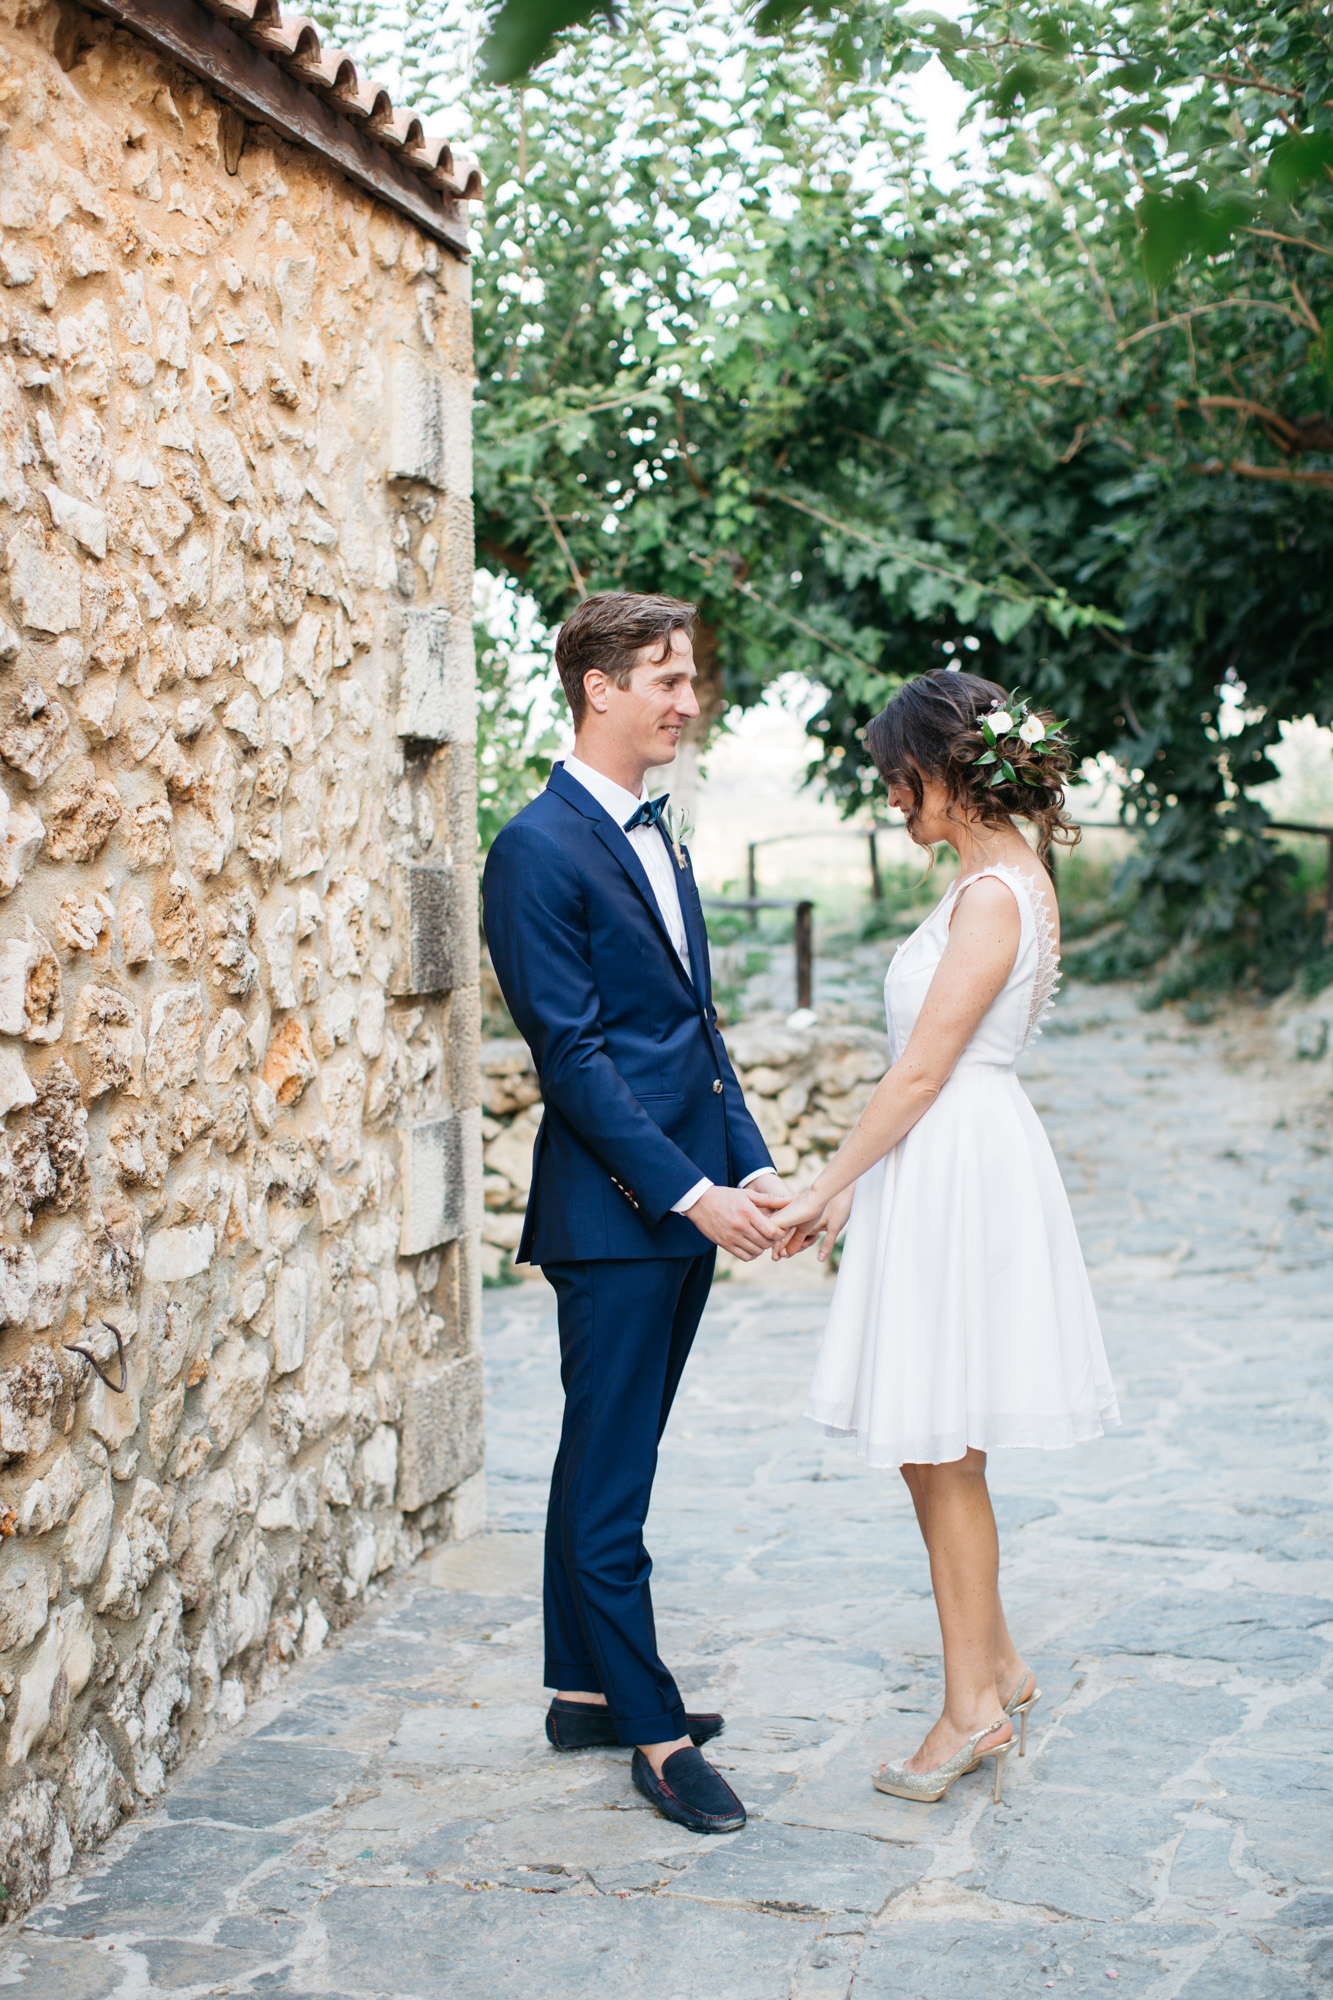 Sweet first look wedding moments at Grecotel Agreco Farm Crete Greece.